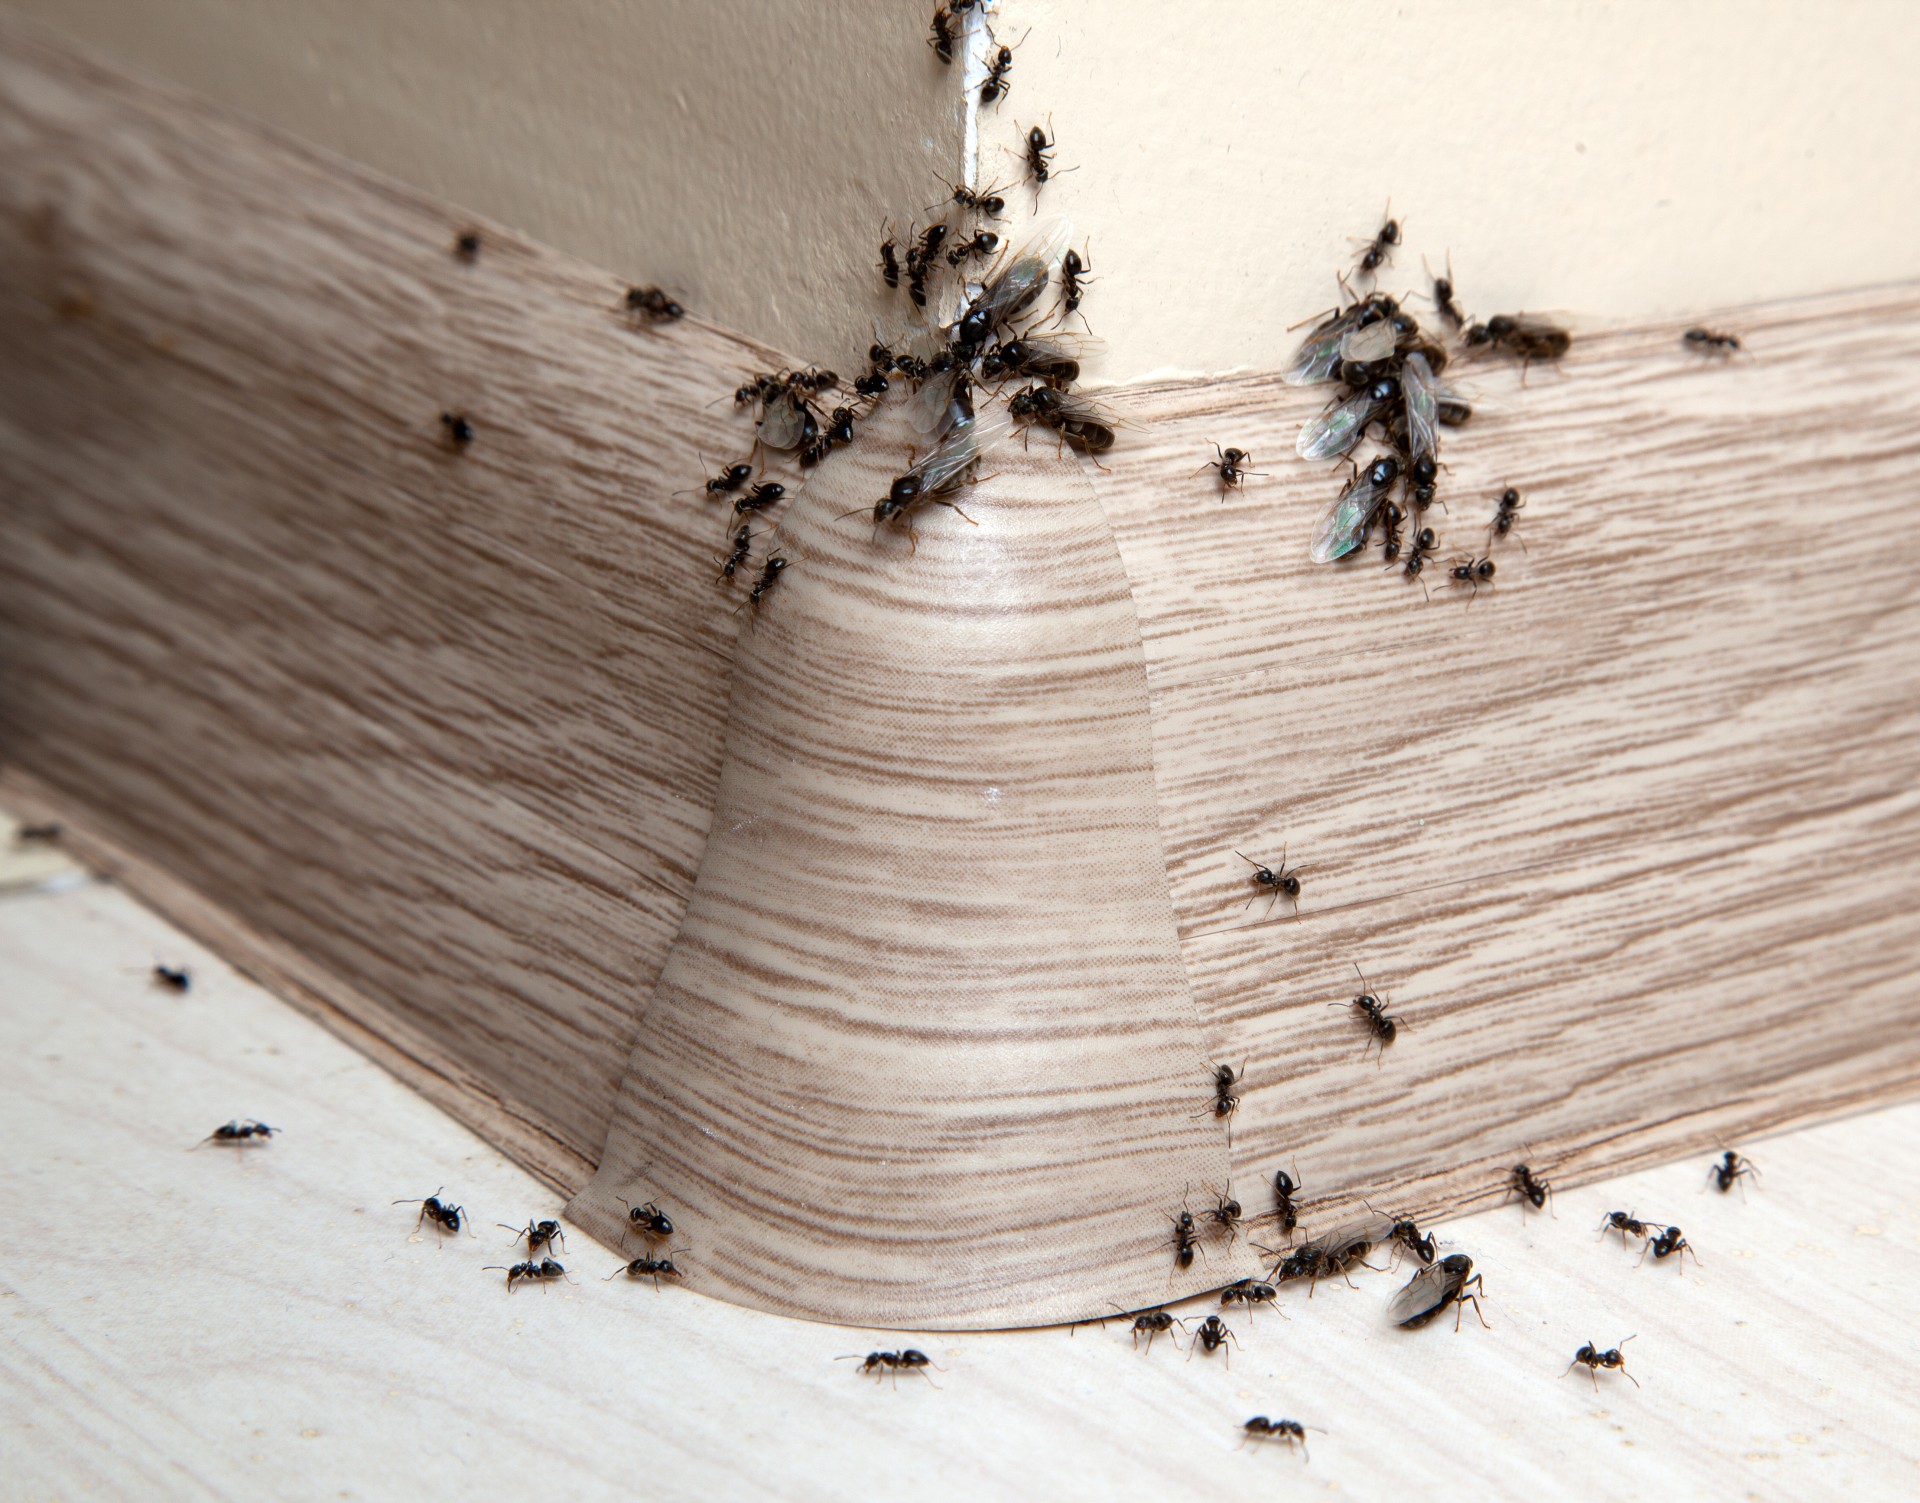 Ant Infestation, Pest Control in Uxbridge, Cowley, UB8. Call Now 020 8166 9746